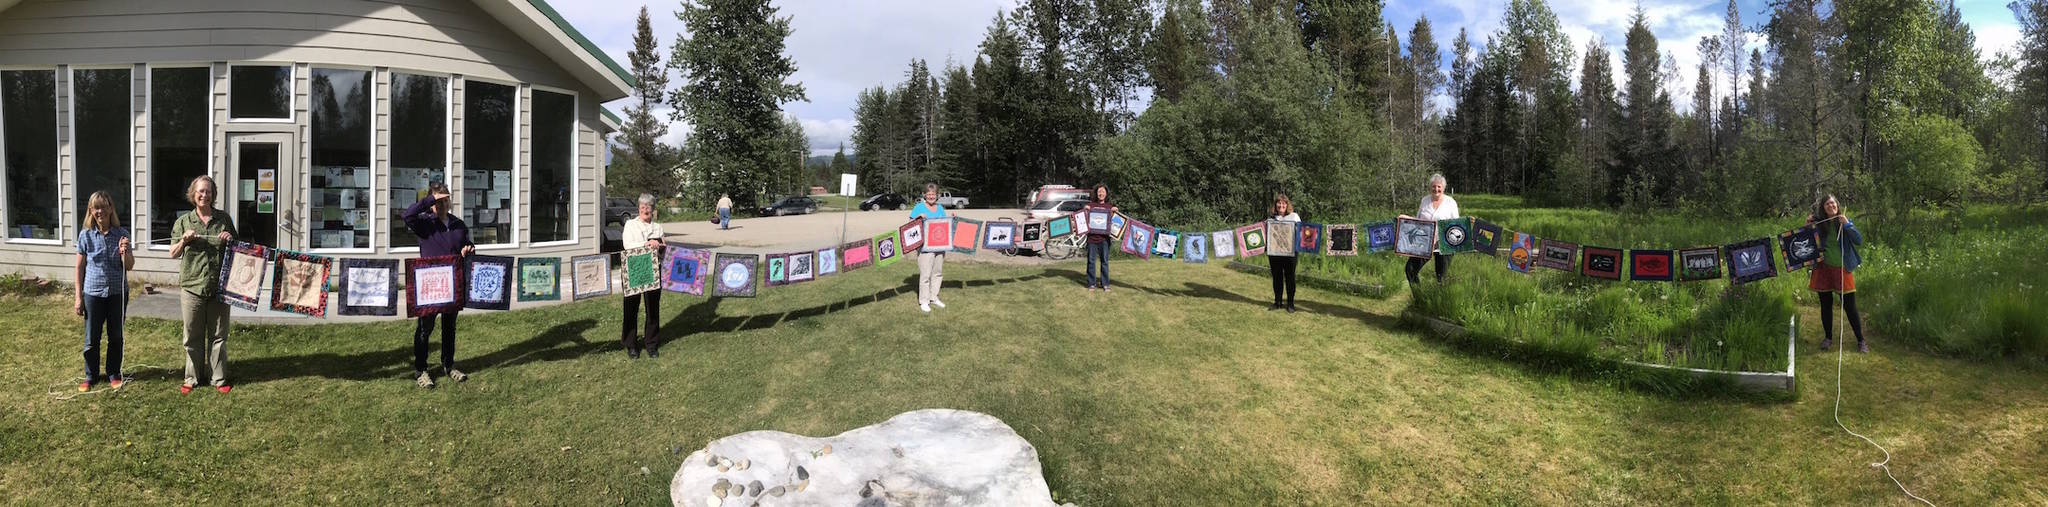 From left to right: Meadow Brook, Kate Boesser, Denise Pratschner, Sandy Schroth, Rita Savage, Chris Gabriele, Annie Mackovjak, Becky King and Ellie Sharman hold up all of the”quiltlets” together, running about 85 feet long. Photo courtesy of Ellie Sharman.